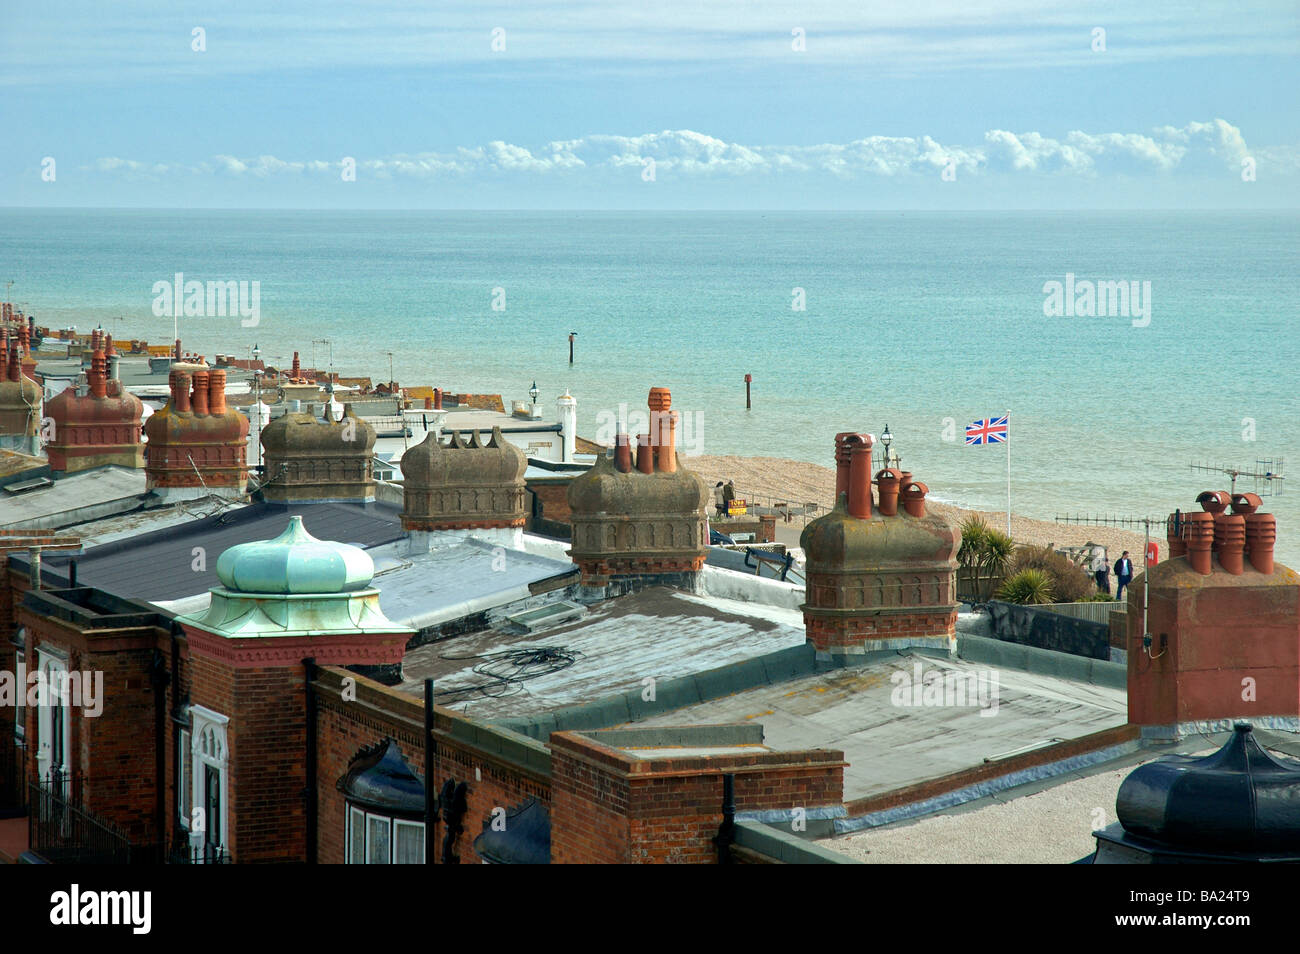 View over rooftops and flying the flag on the beach at Bexhill On Sea, East Sussex, England. Stock Photo